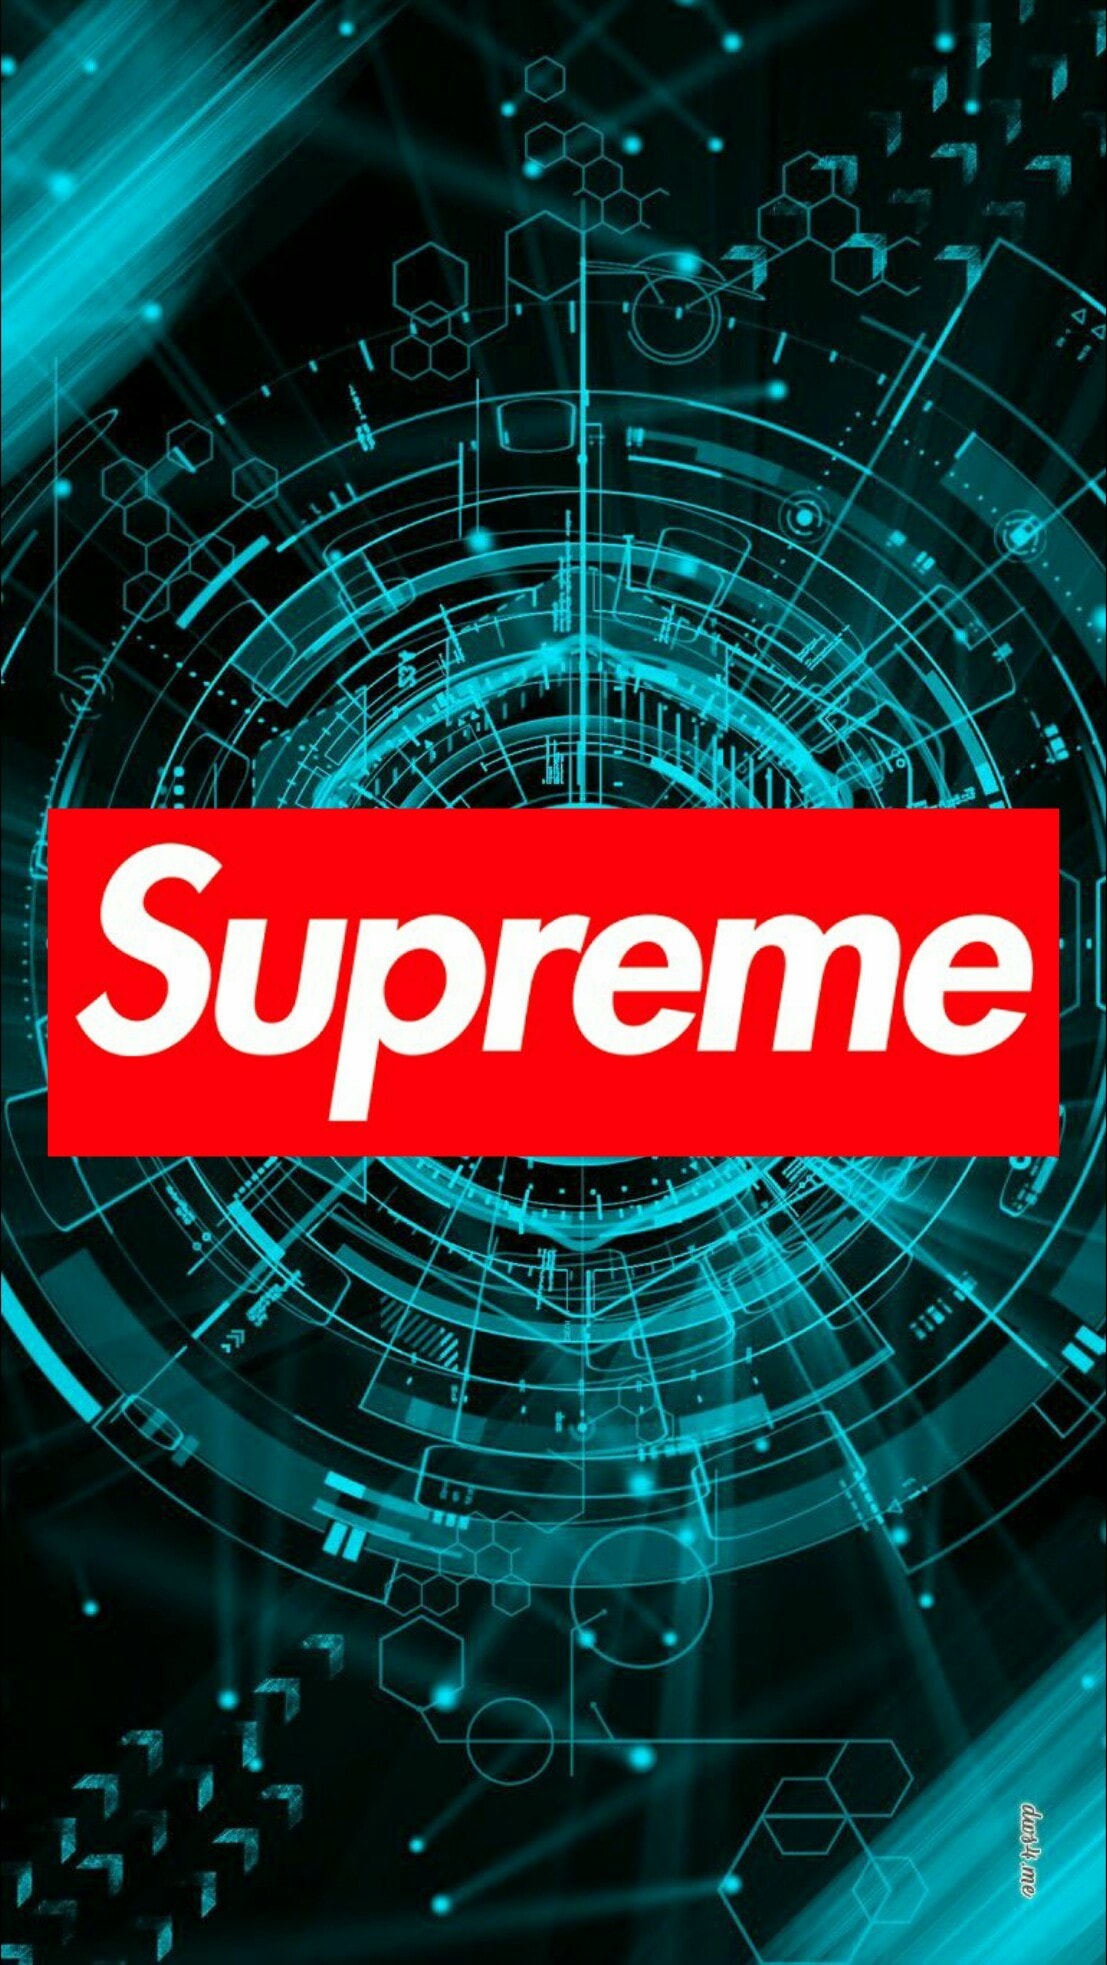 Supreme Iphone Hd Wallpapers